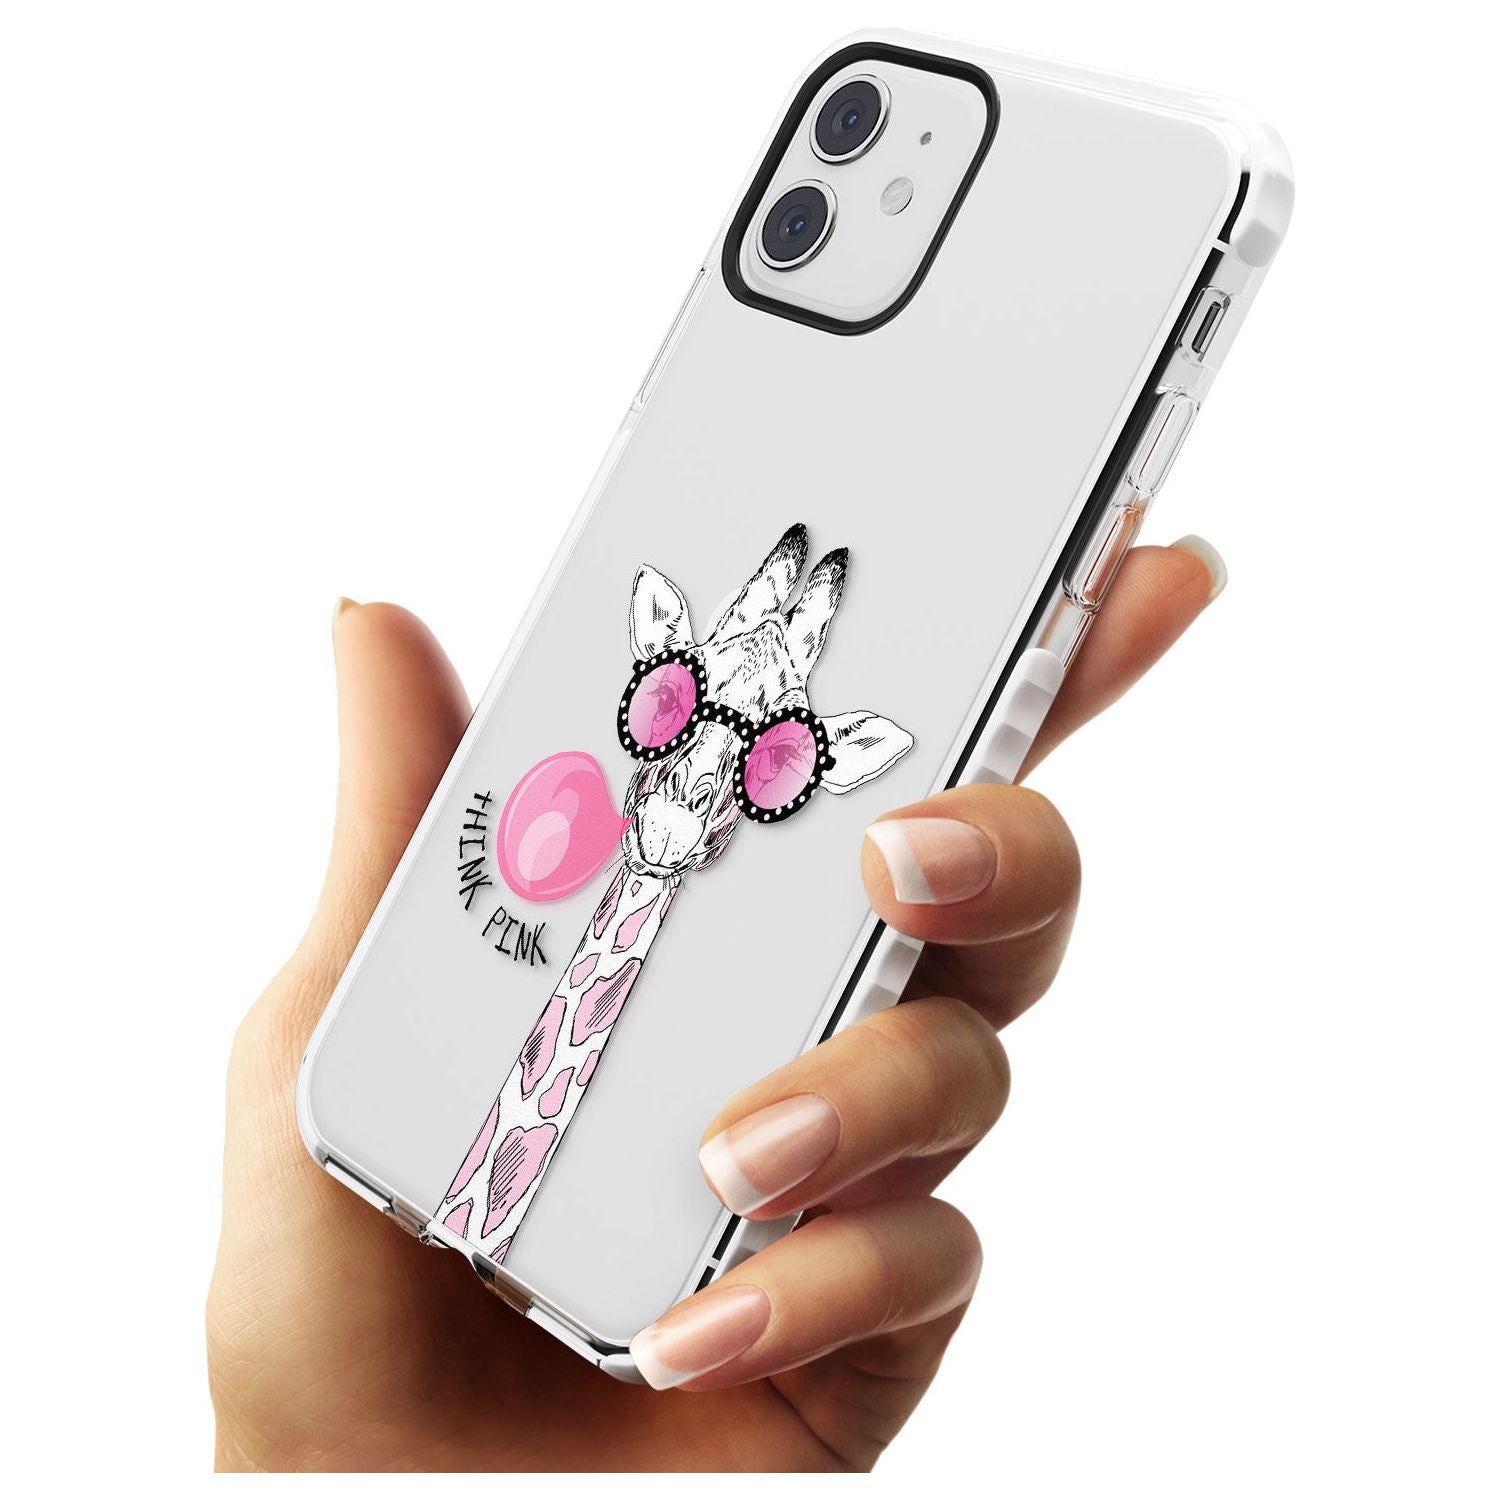 Think Pink Giraffe Impact Phone Case for iPhone 11